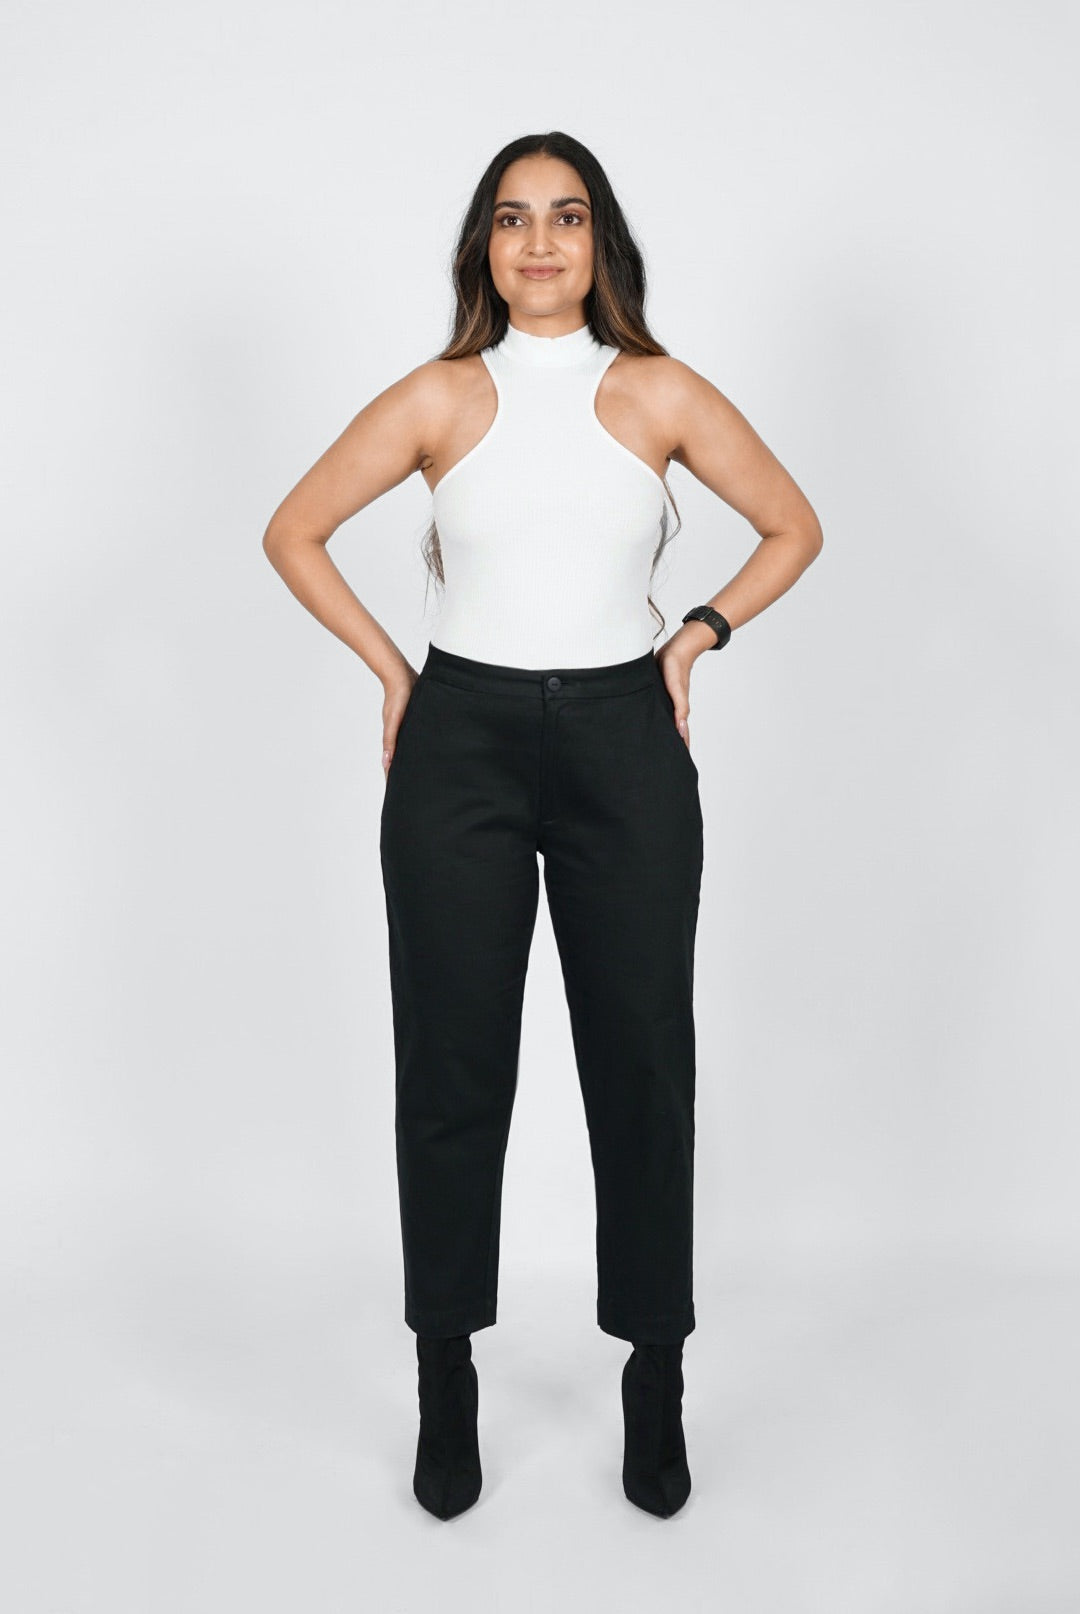 The Crop Pant by Aam is a relaxed, cotton trouser designed for women with full hips and thighs. It's made from a butter-soft, 98% organic cotton with 2% stretch. Big pockets allow you to comfortably slide your hands or phone, and a small back elastic provides comfort at the waist. The Crop Pant comes in two colors - black (pictured here) and beige.